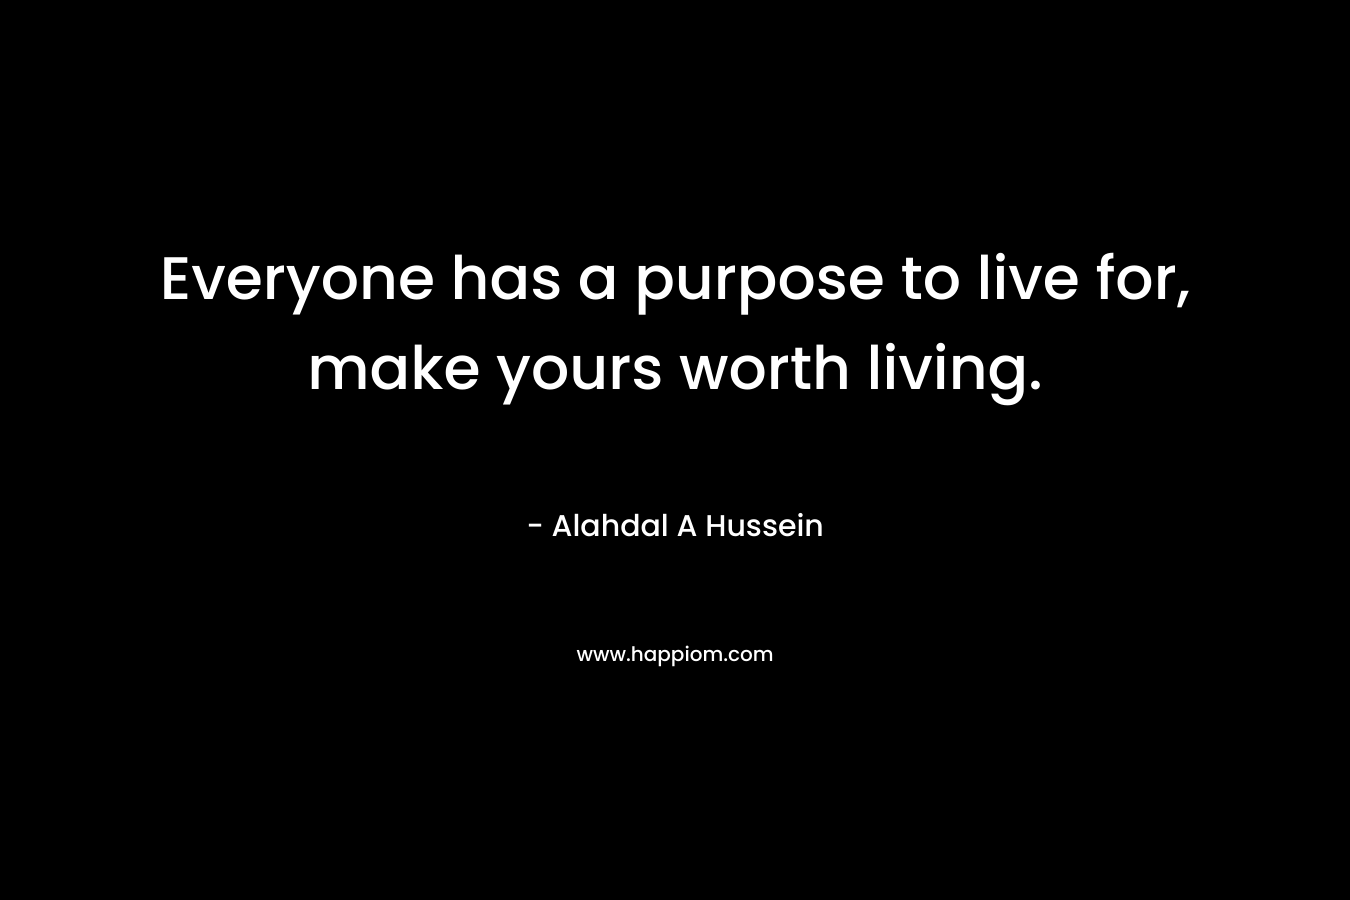 Everyone has a purpose to live for, make yours worth living. – Alahdal A Hussein